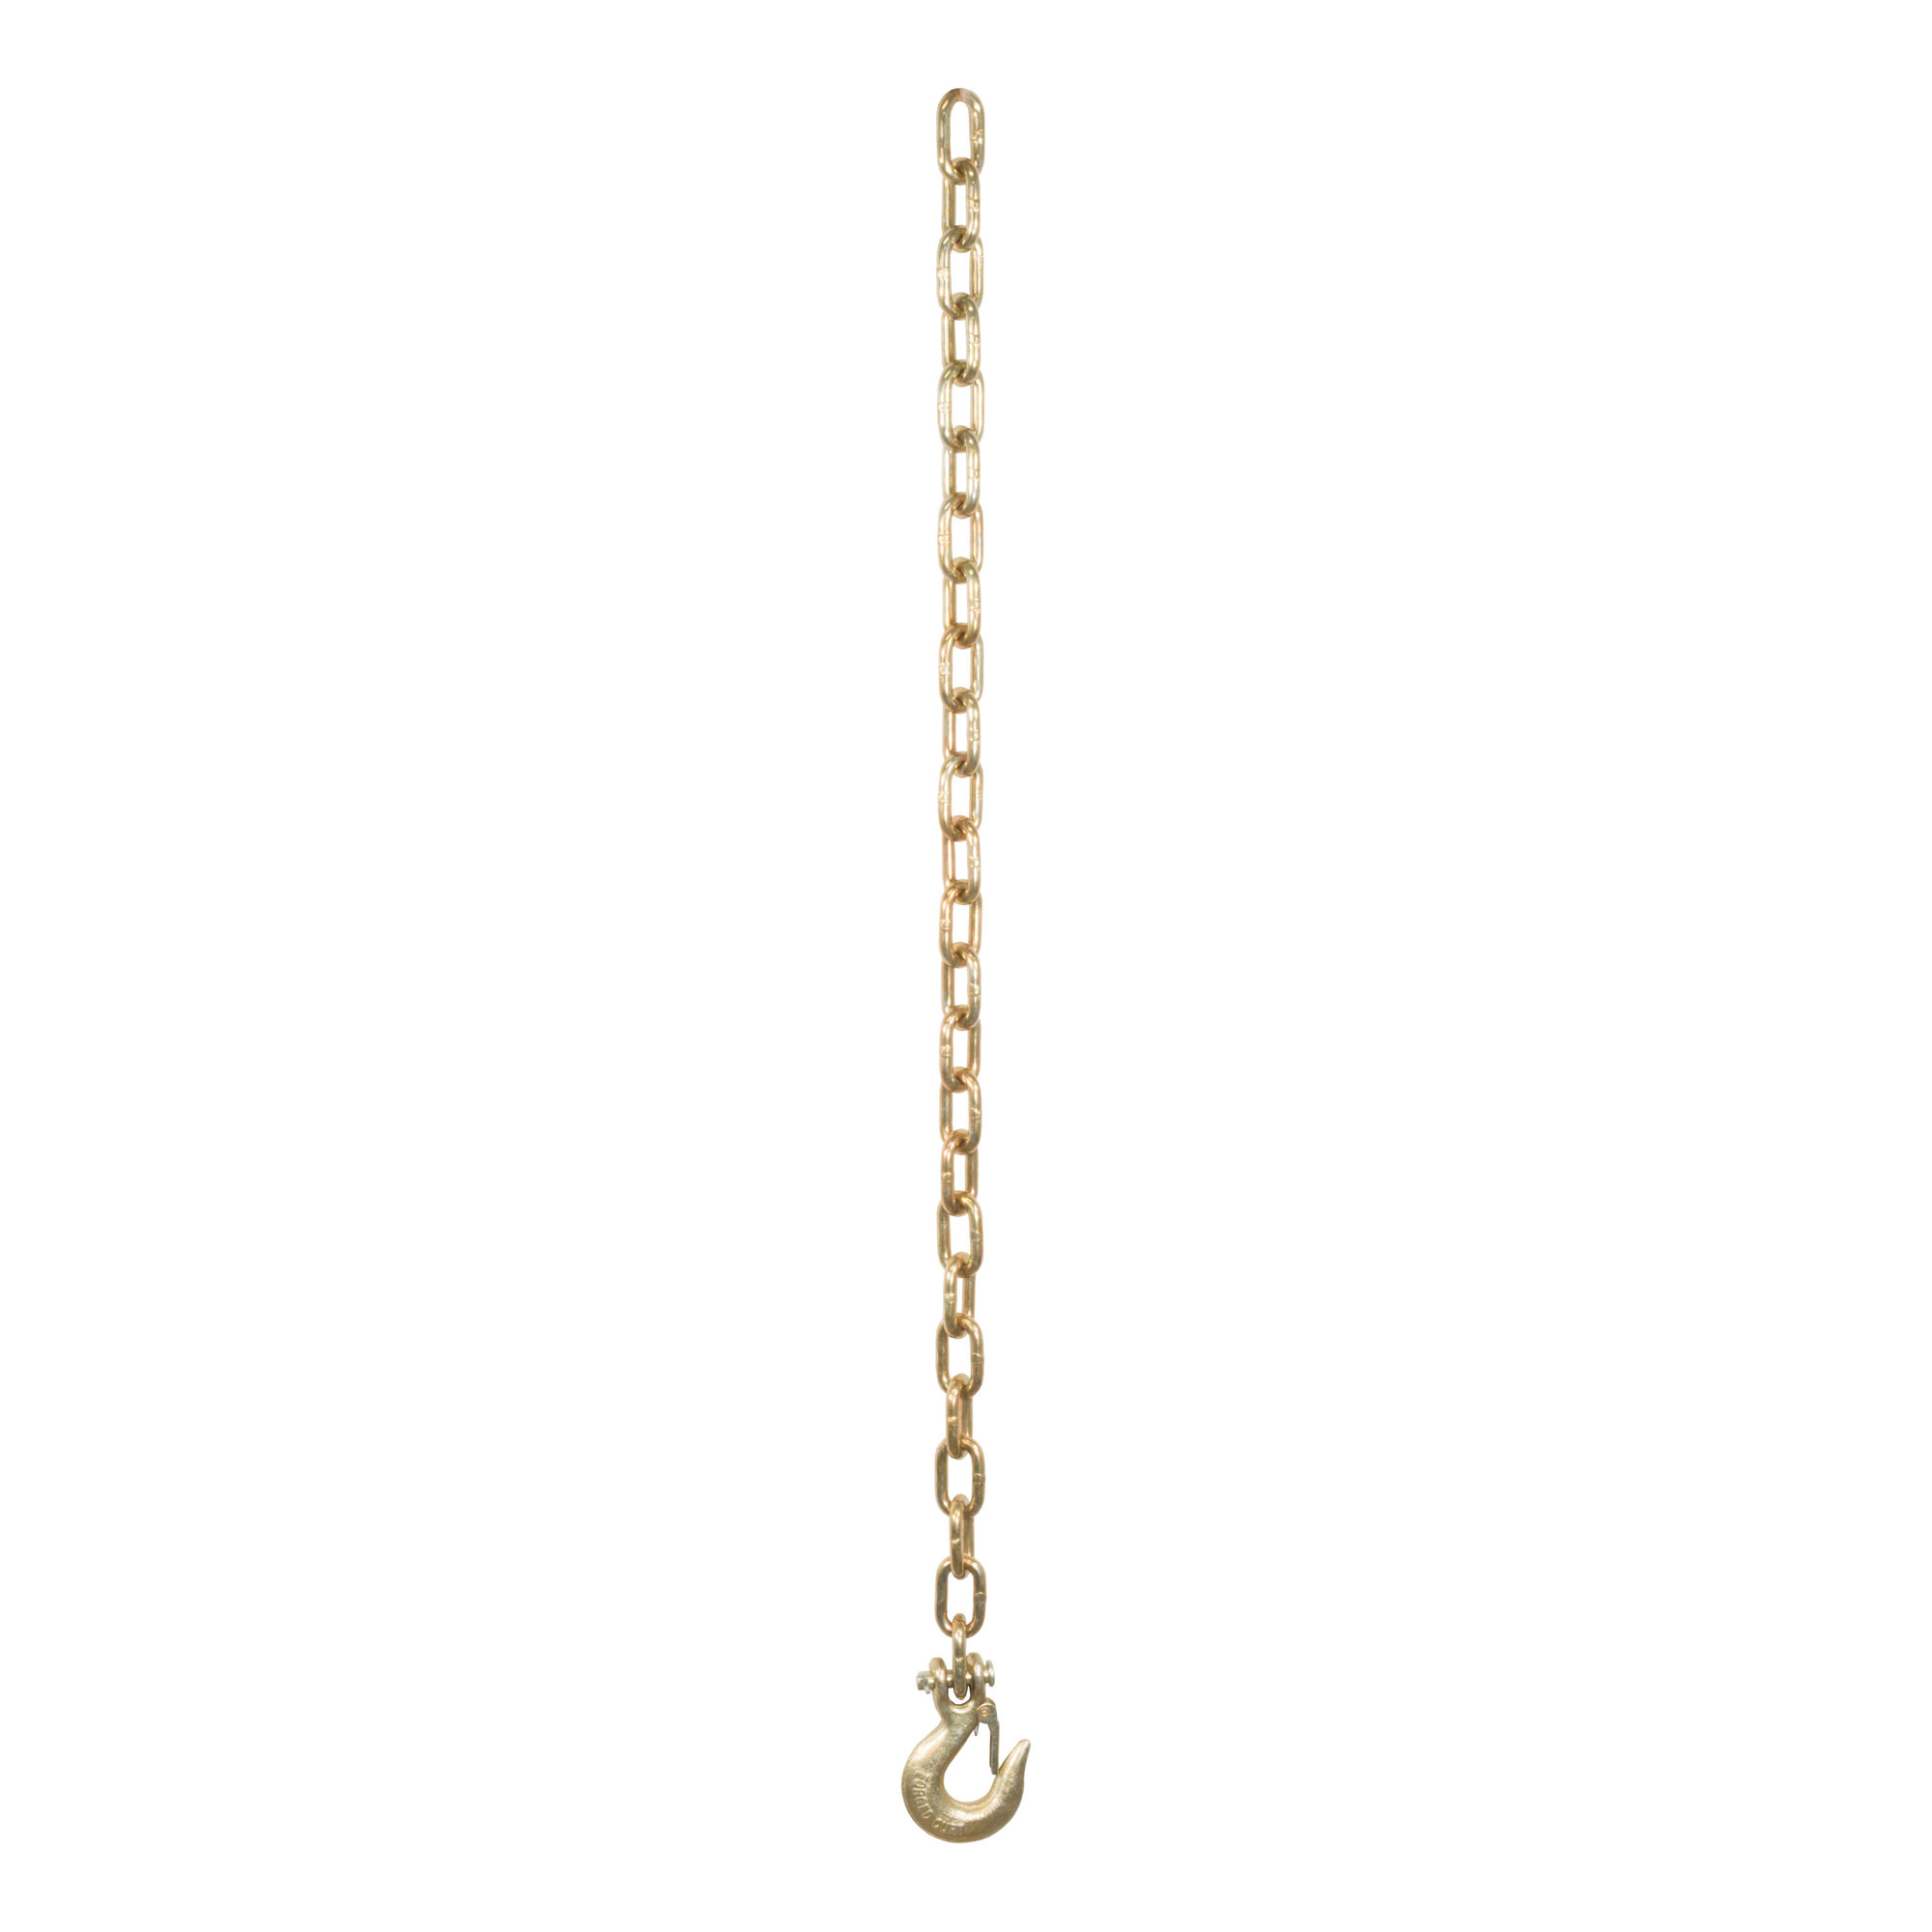 Curt Manufacturing, 35Inch Safety Chain with 1 Clevis Hook, Length 35 in, Material Steel, Model 80303